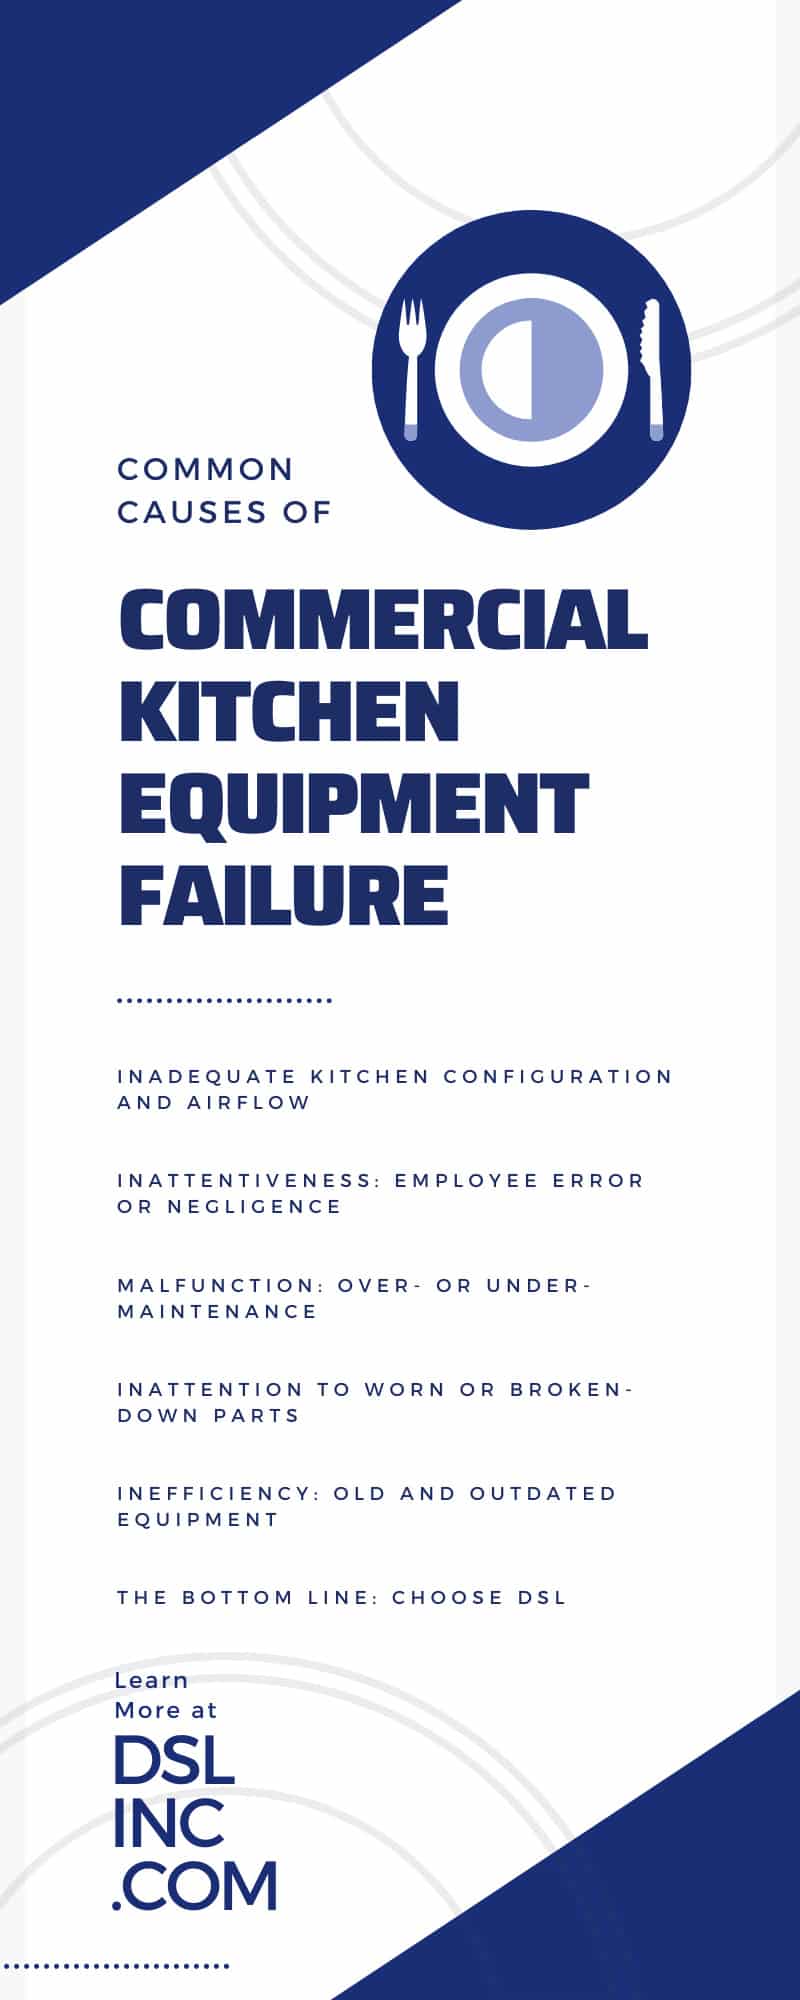 Common Causes of Commercial Kitchen Equipment Failure